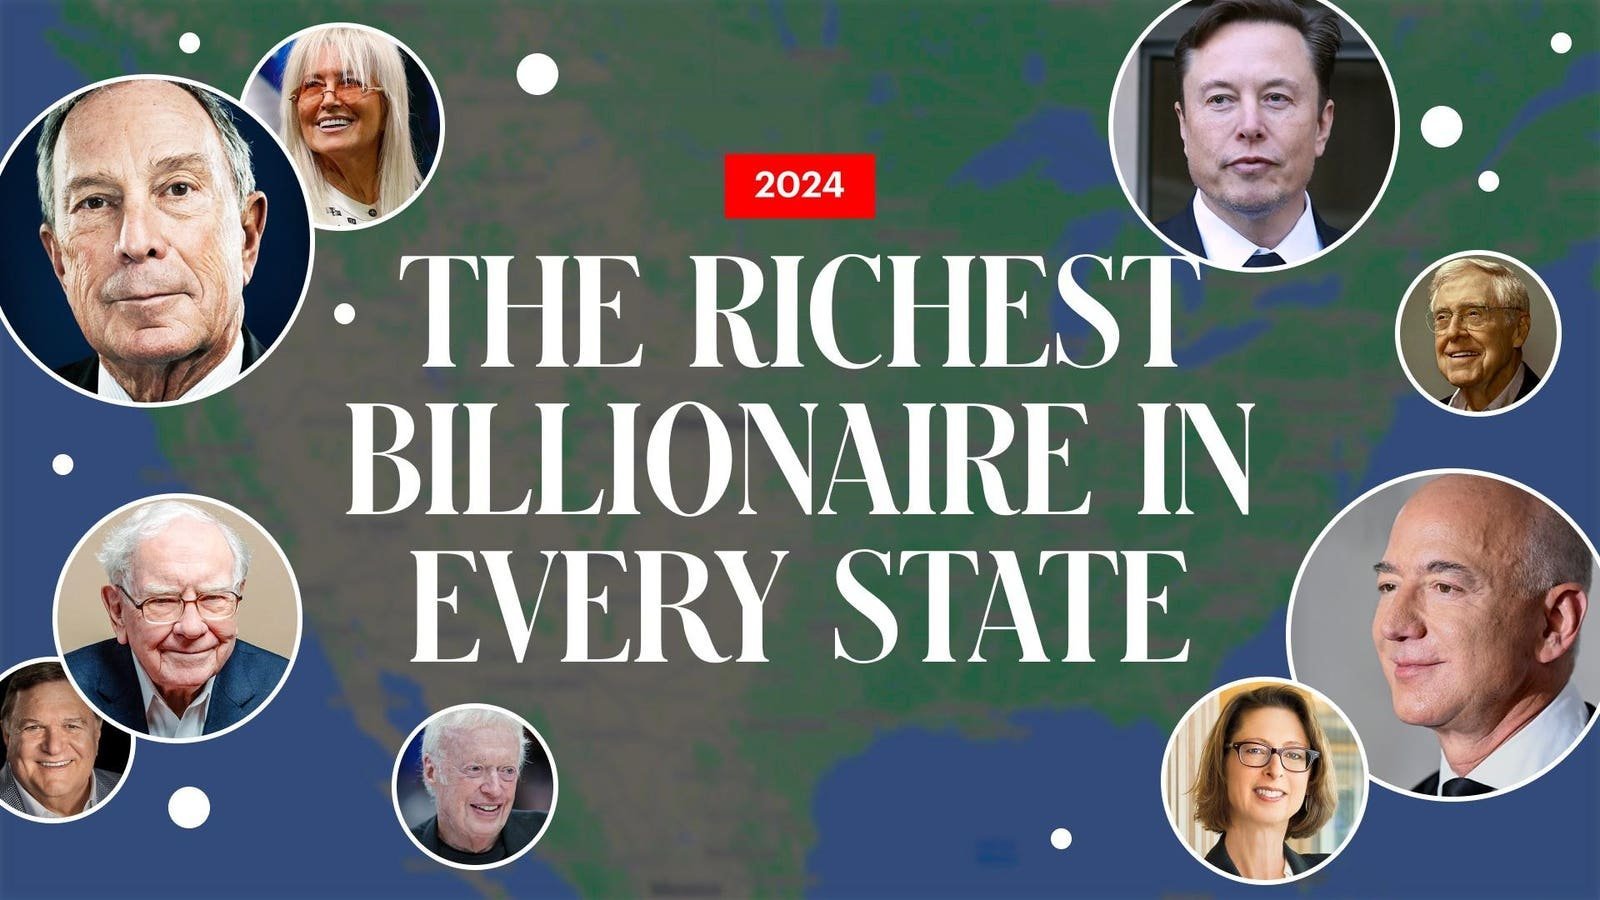 The Richest Billionaire In Every State 2024